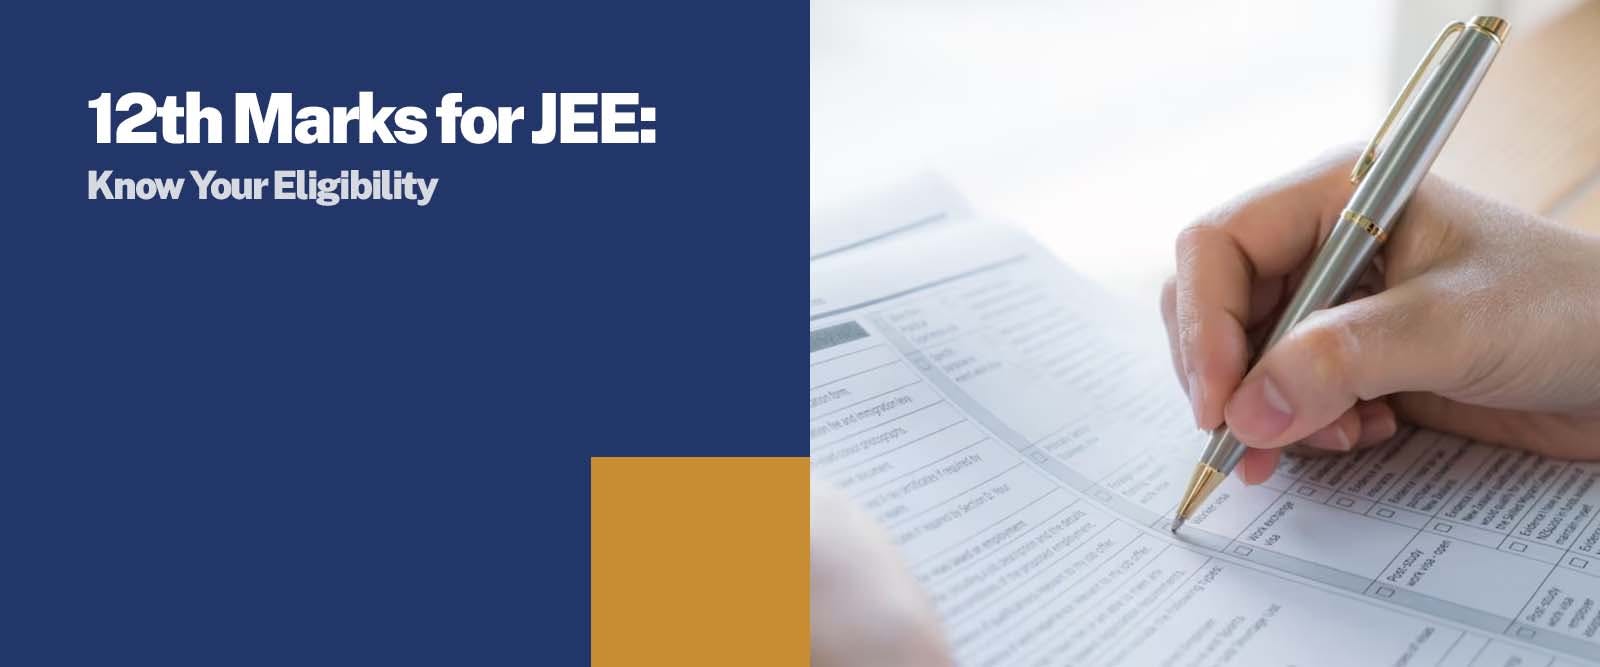 12th Marks for JEE: Know Your Eligibility